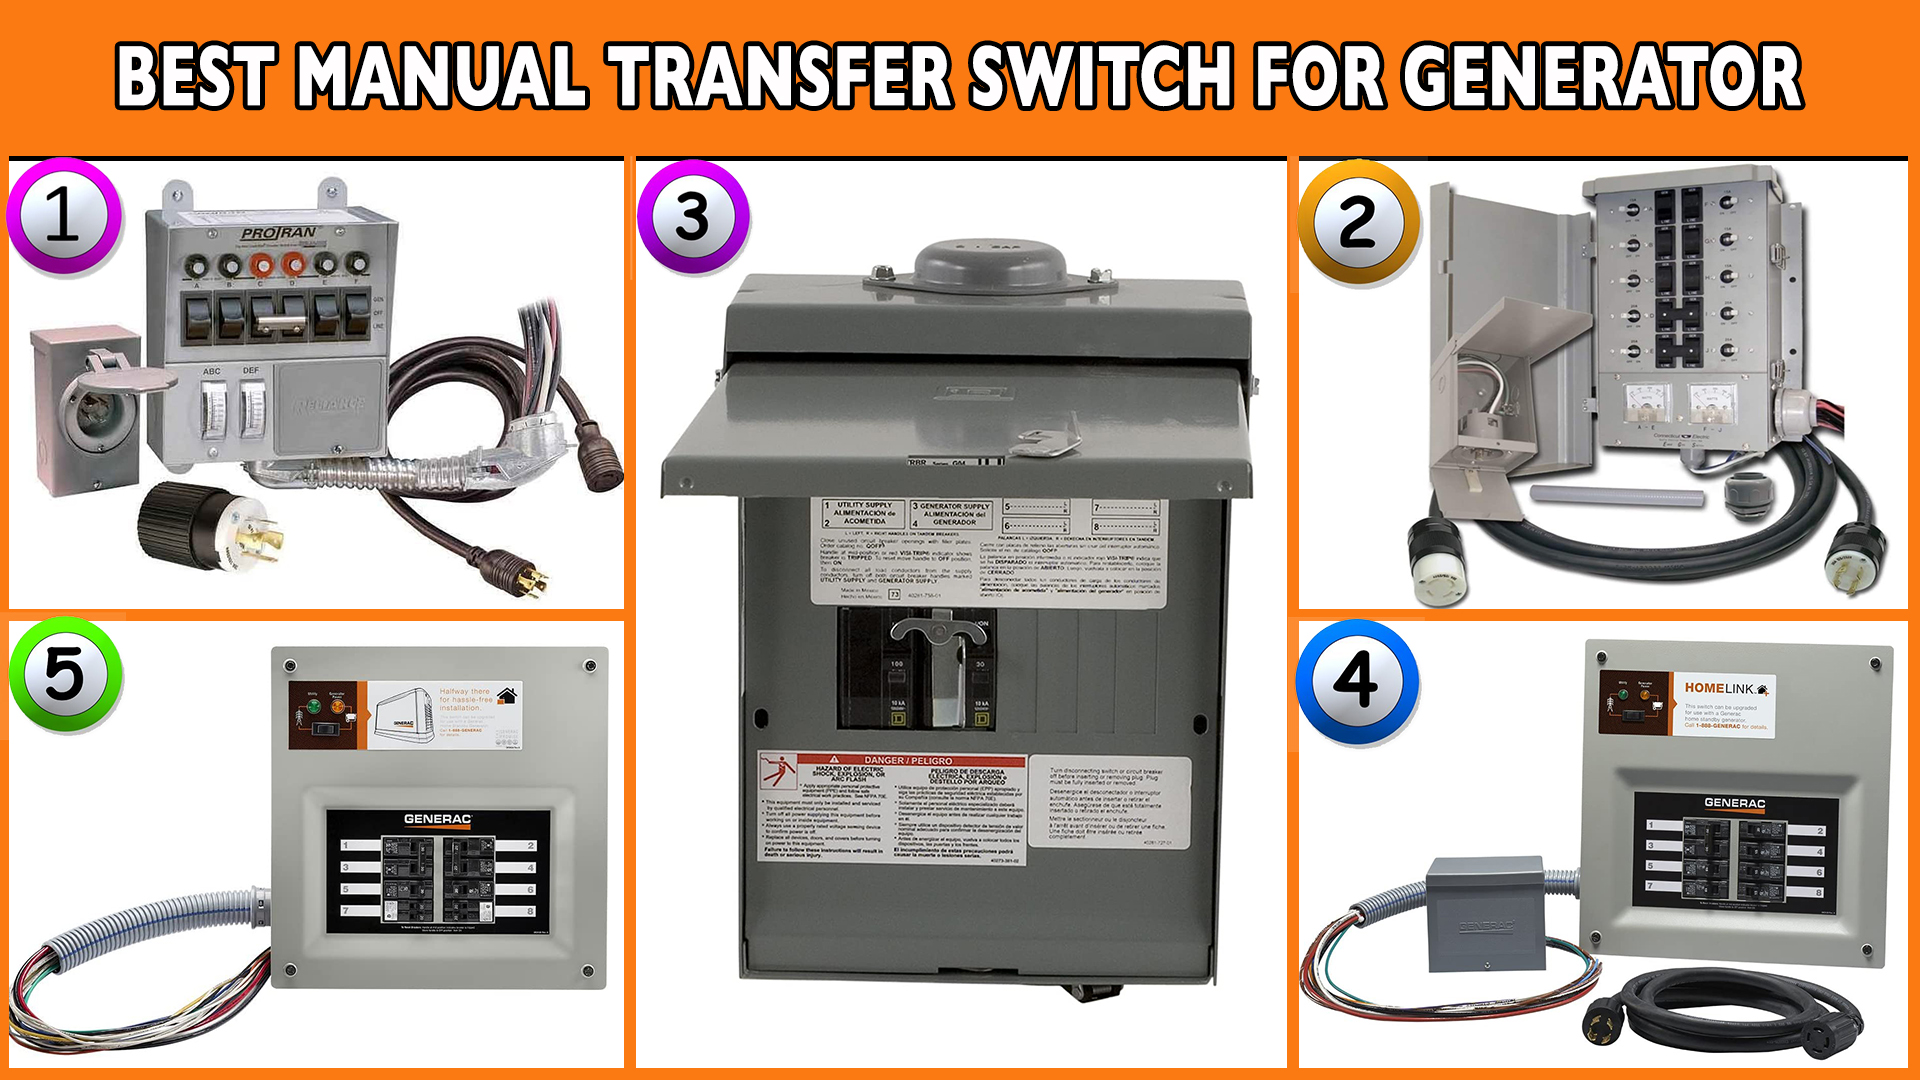 Best Manual Transfer Switch for Generator